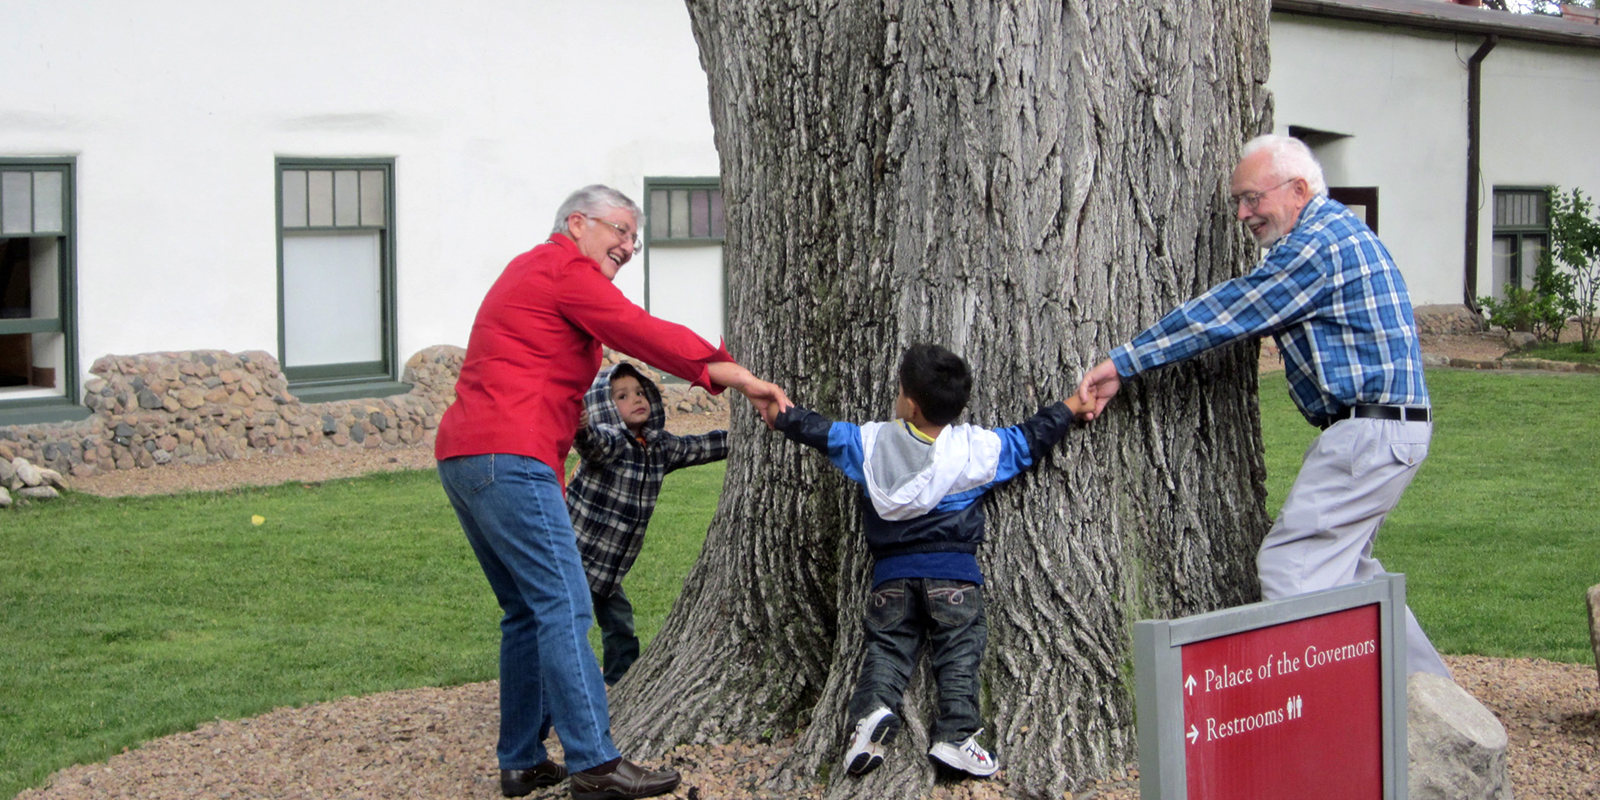 Visitors try to see how many people it takes to circle an elm tree in the courtyard. Photo by Kate Nelson